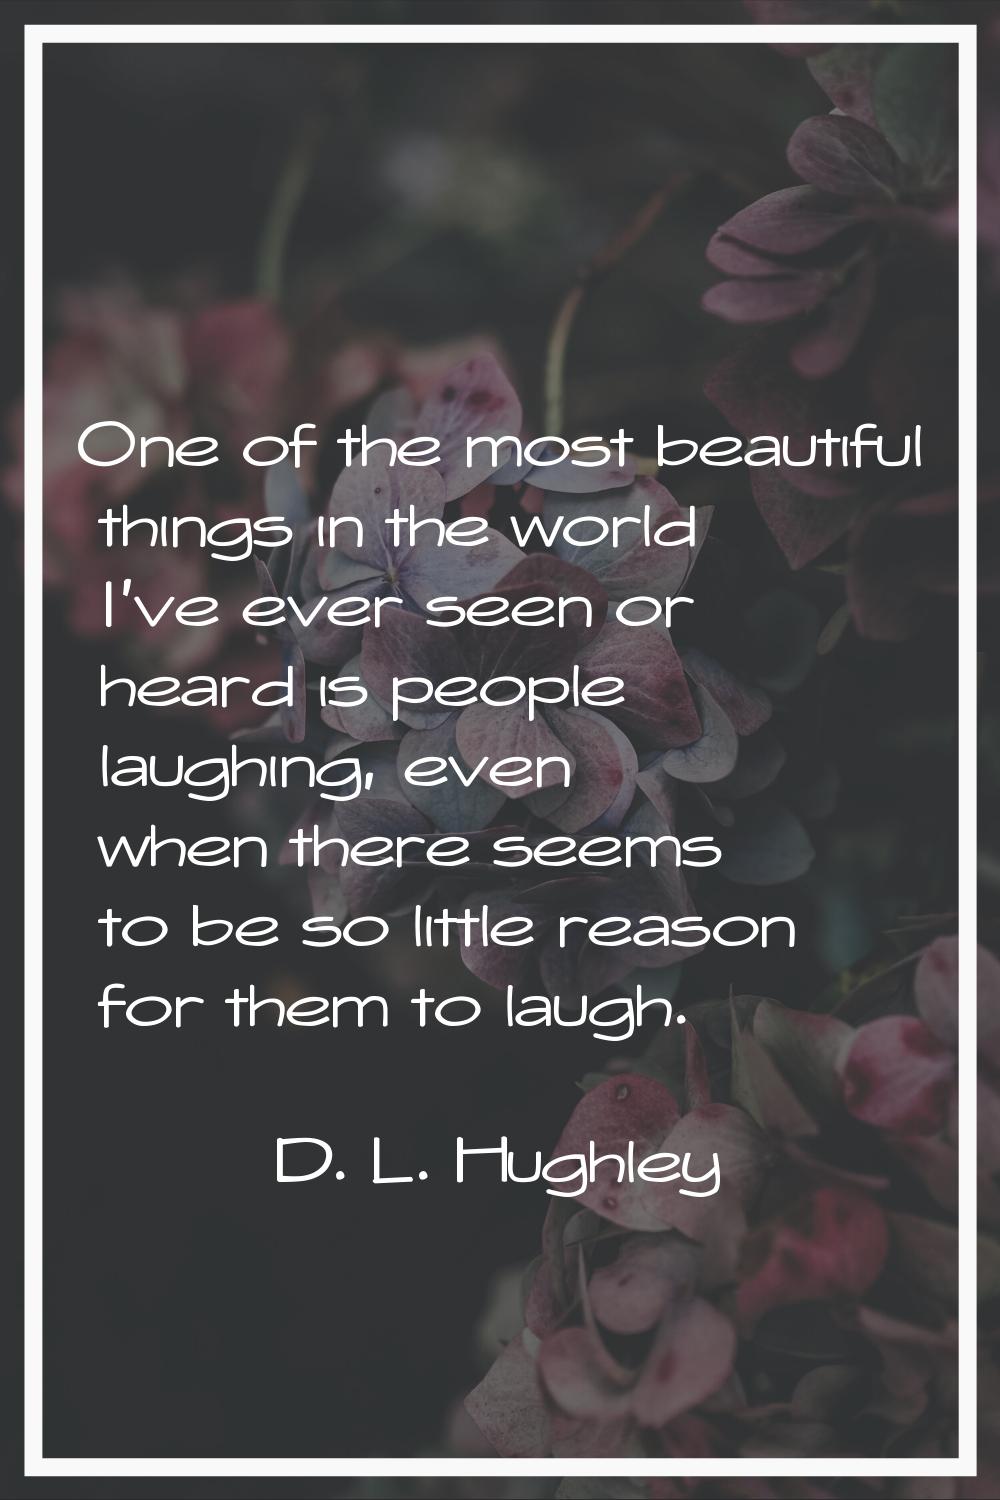 One of the most beautiful things in the world I've ever seen or heard is people laughing, even when